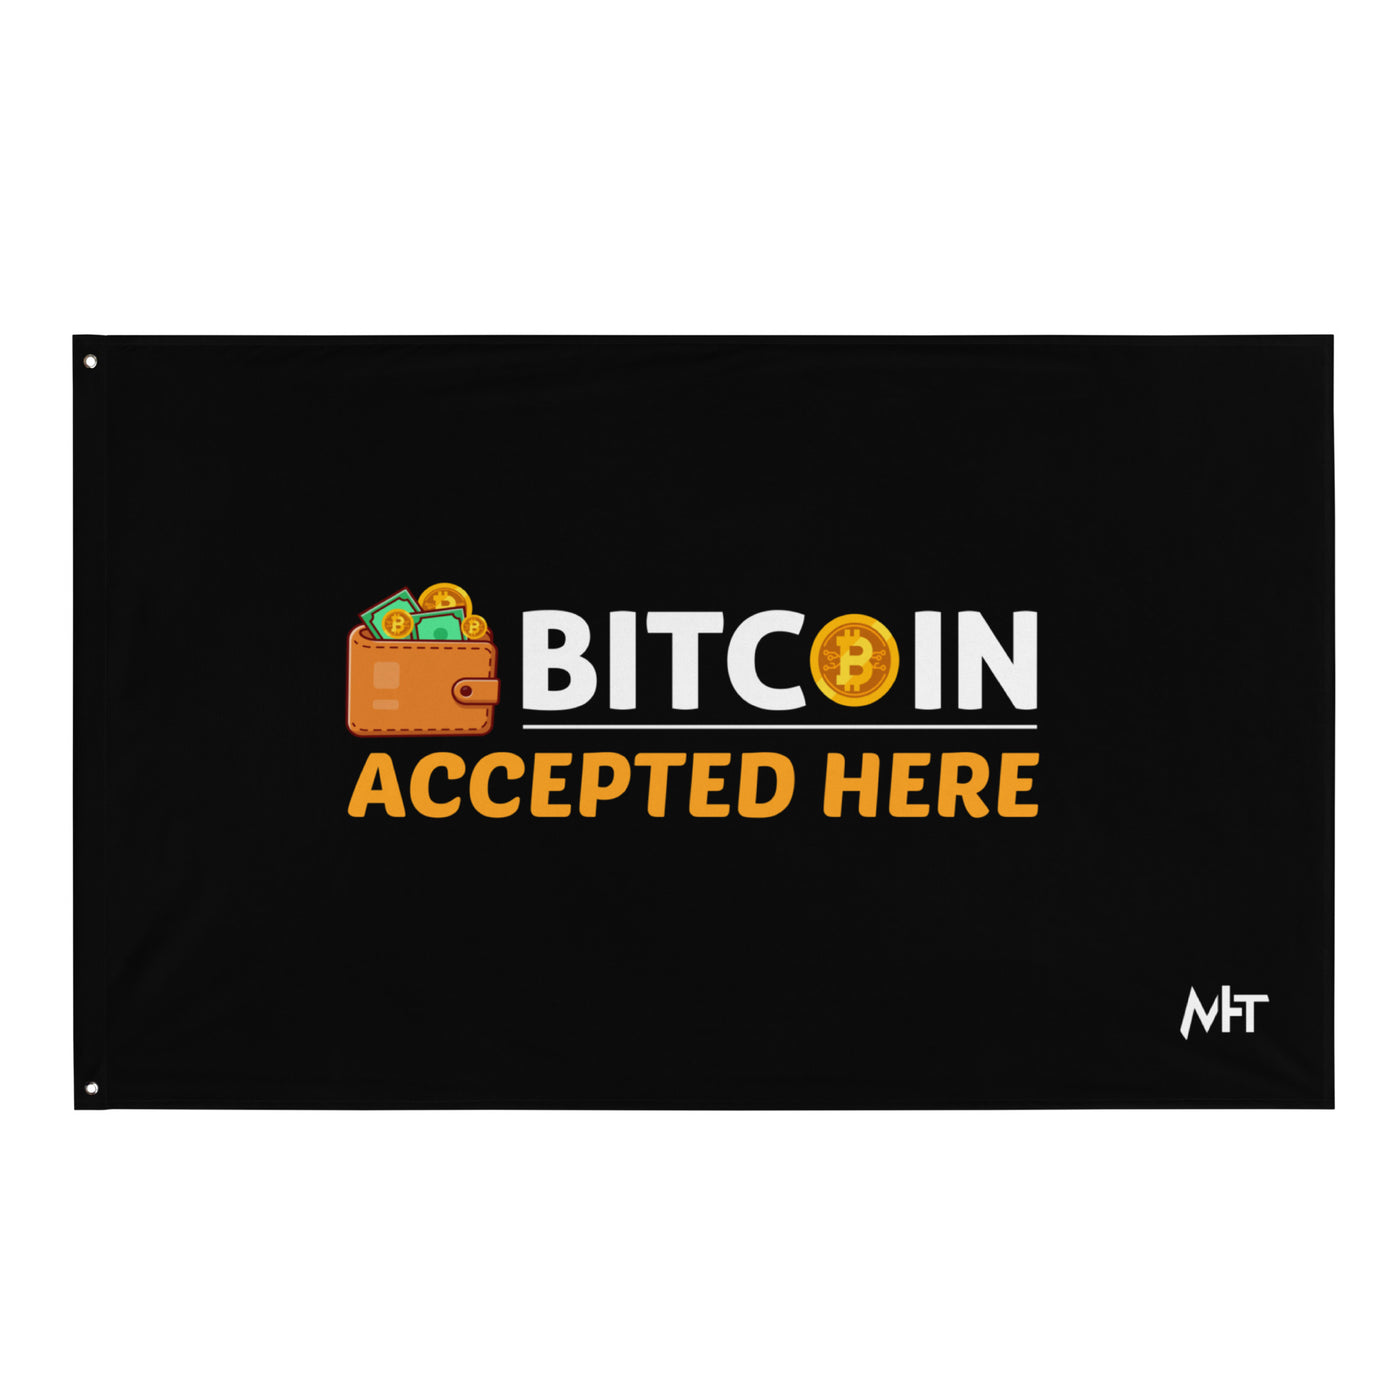 Bitcoin Accepted Here - Flag